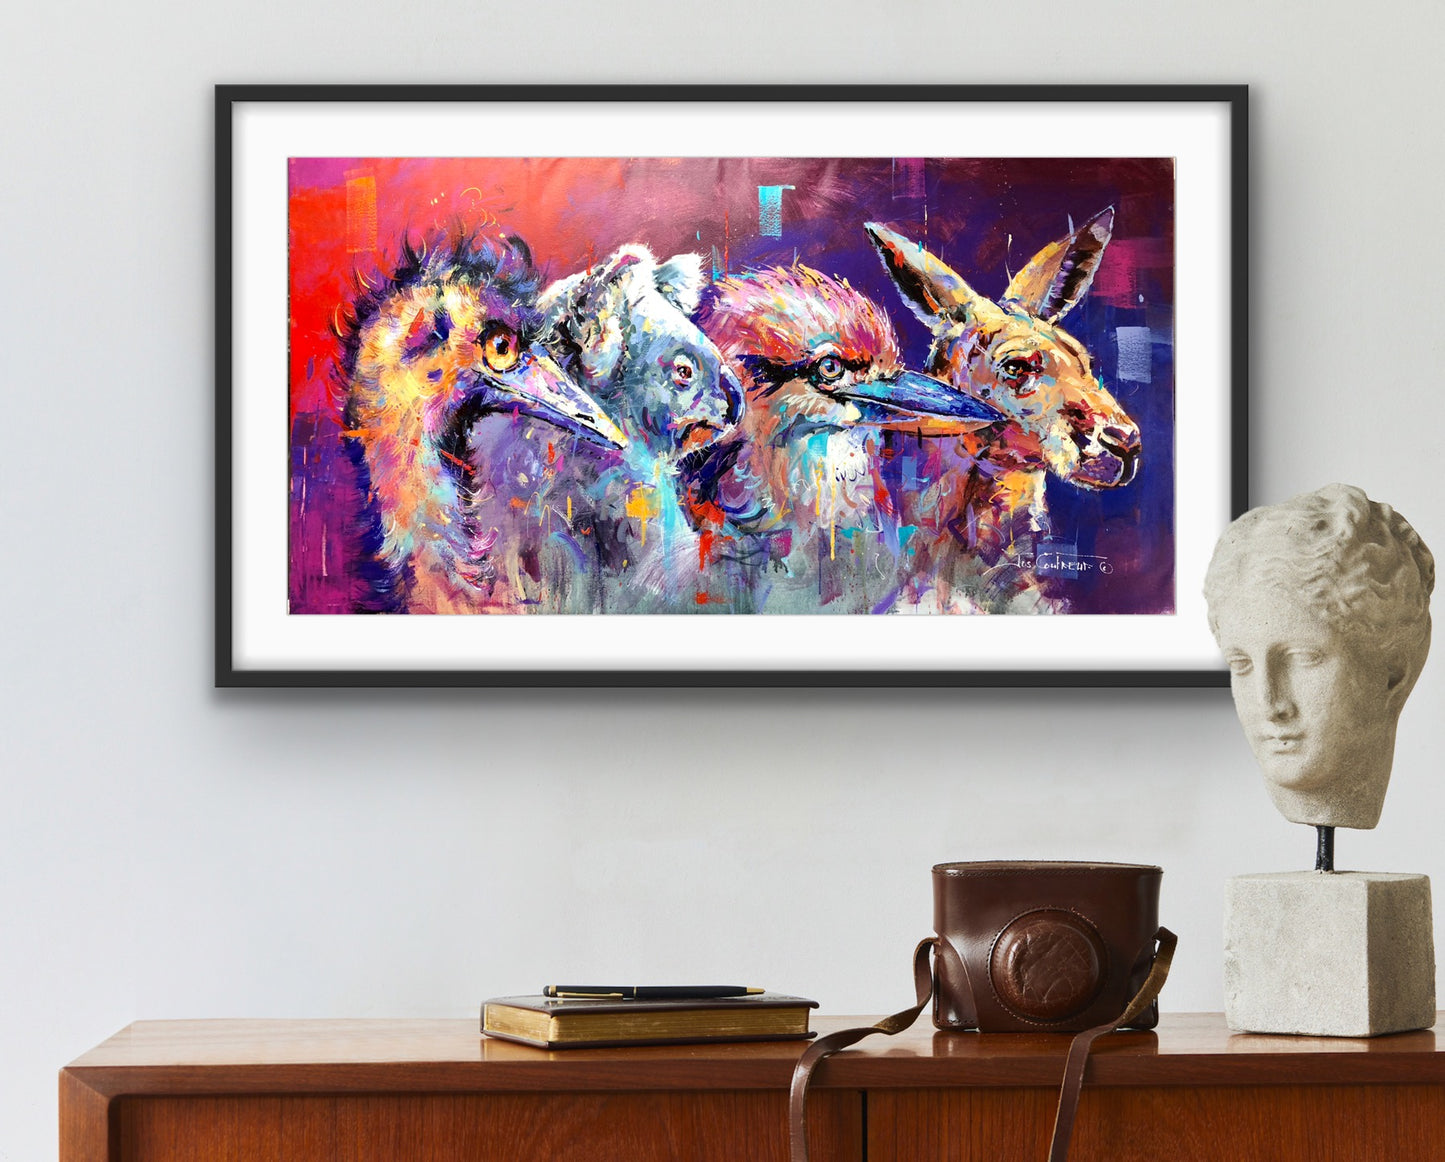 Australiana Tableaux - Ed. 2 of 50 - Limited Edition Print